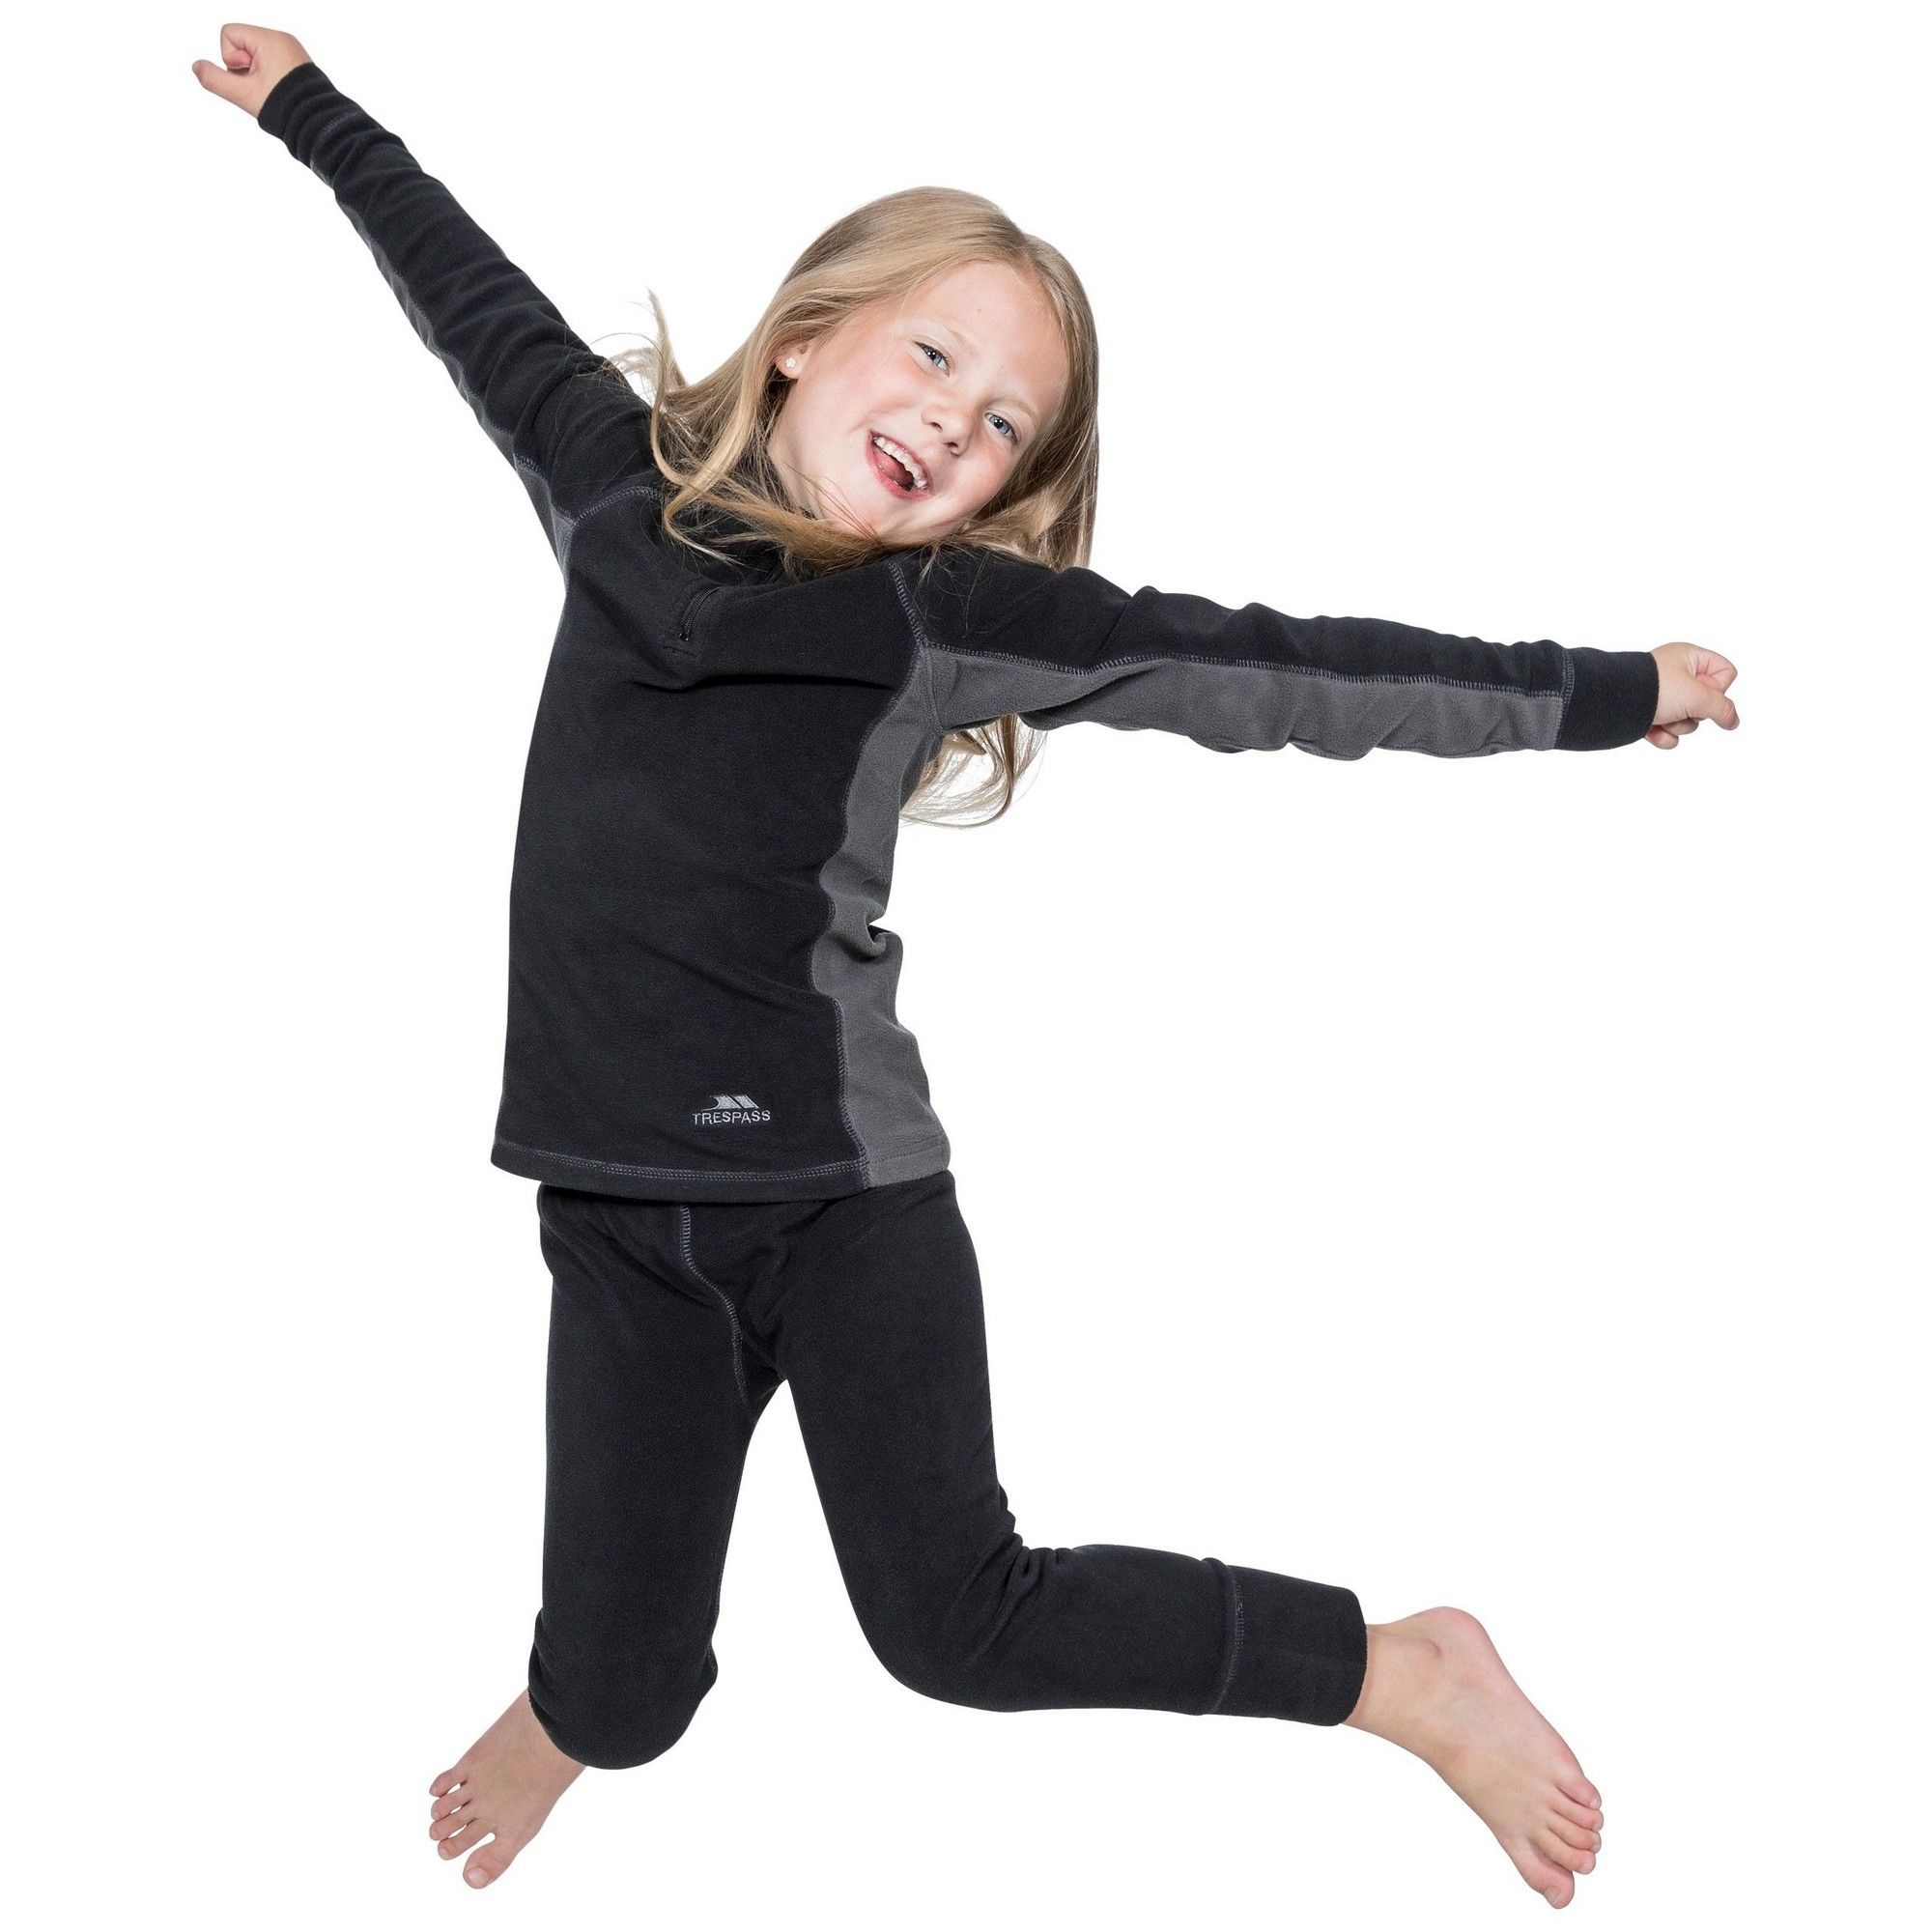 Childrens thermal top and bottom base layers made from fleece material. Lightweight and slim fitting. Half zip, raglan sleeves and contrast patches on top. Elastic waistband on bottoms for secure fit. Ideal for wearing under regular clothes on a cold day. 100% Polyester.